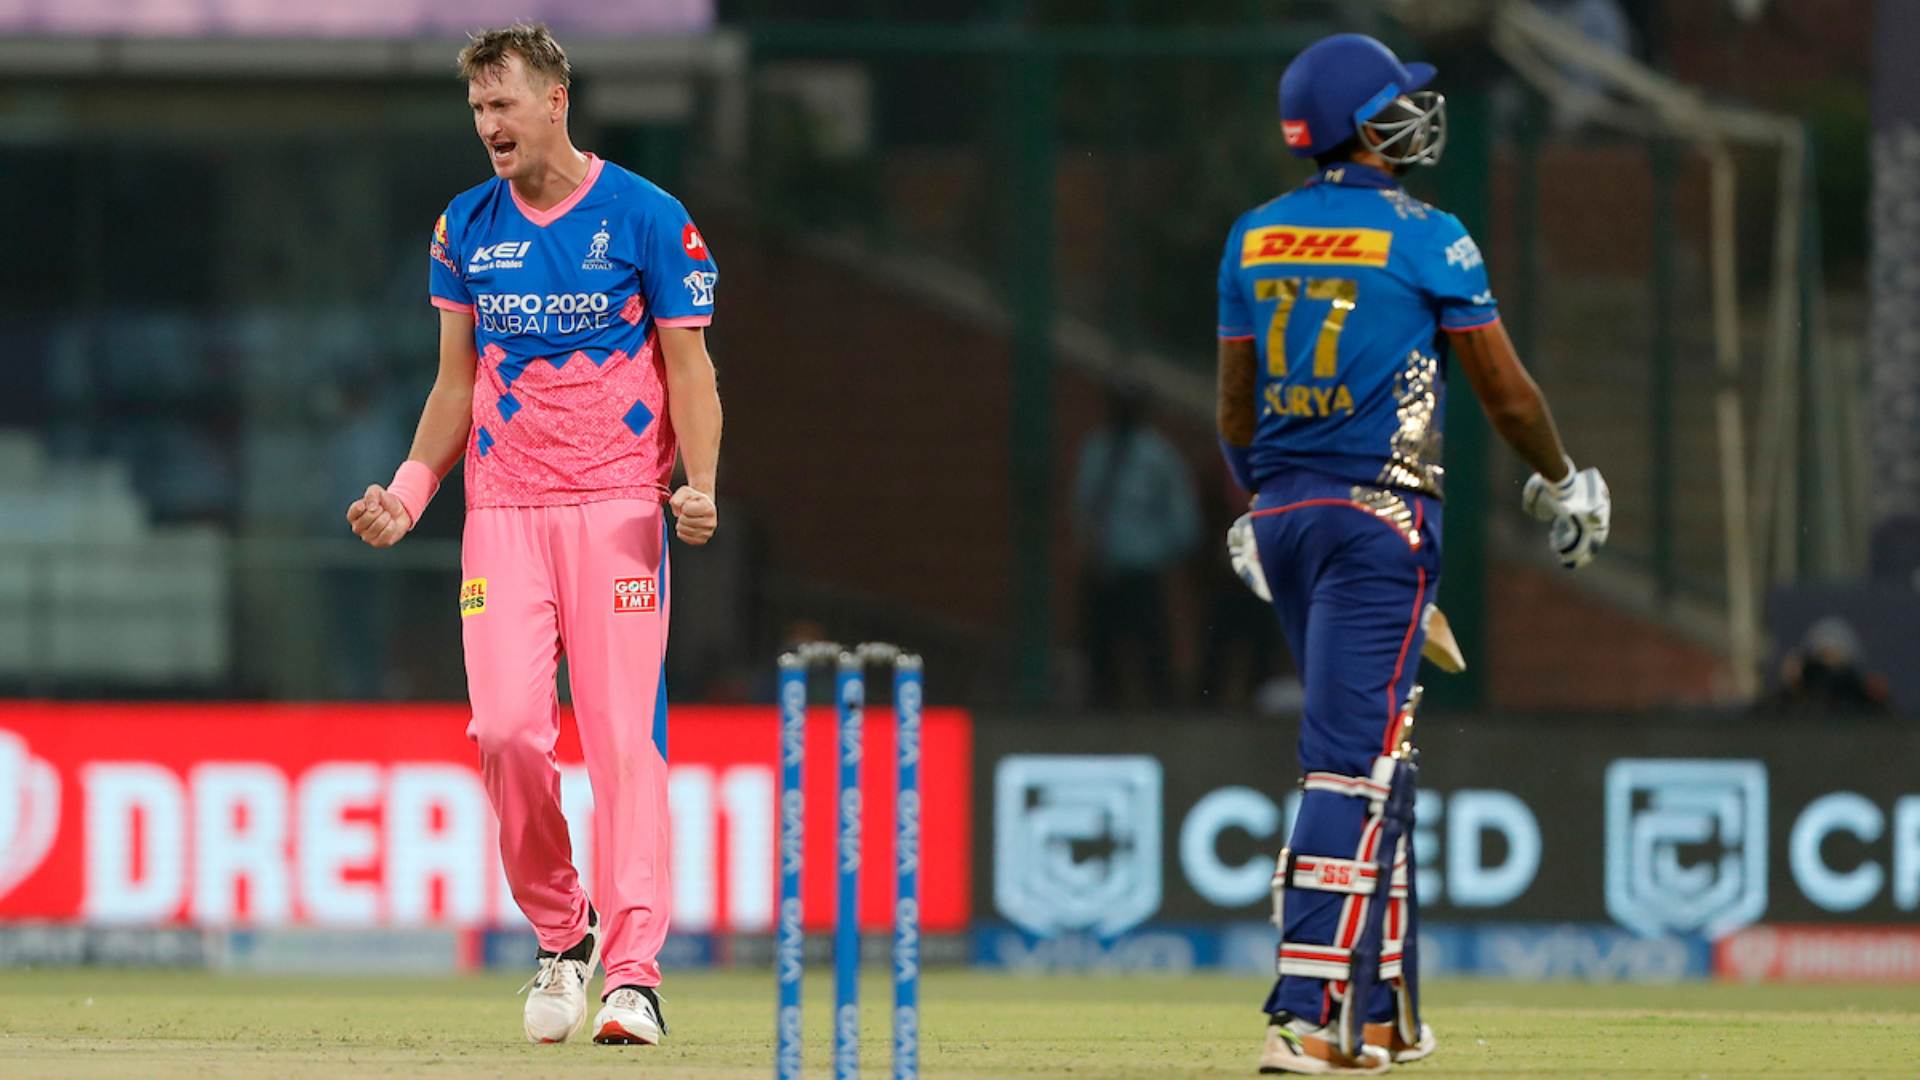 Rajasthan Royals are in seventh position in the IPL points table.